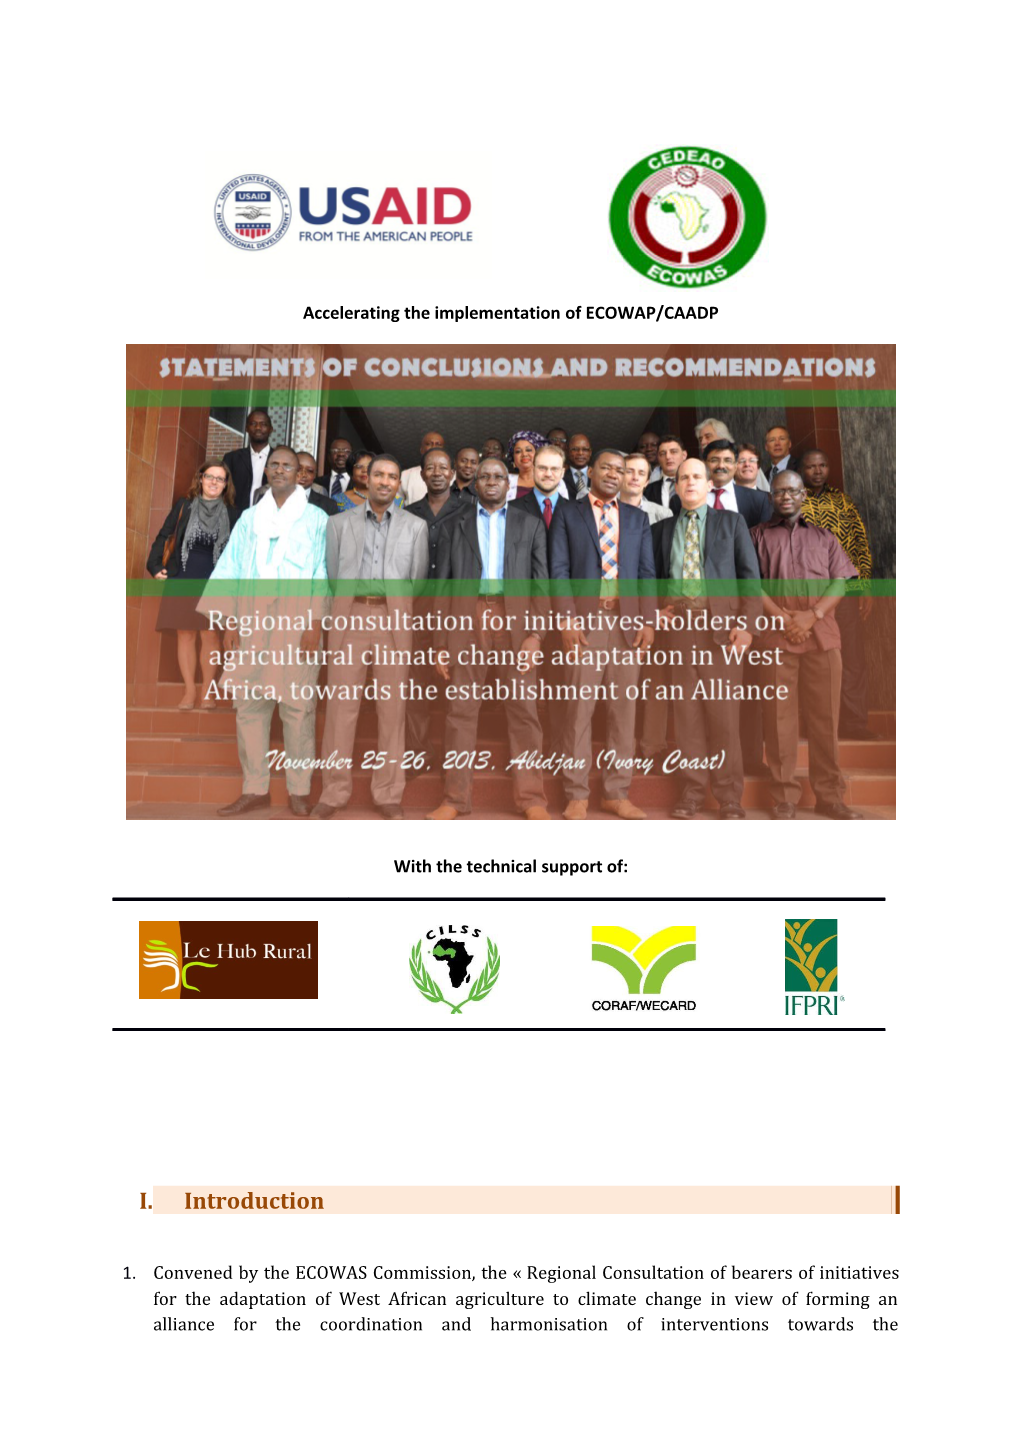 Accelerating the Implementation of ECOWAP/CAADP